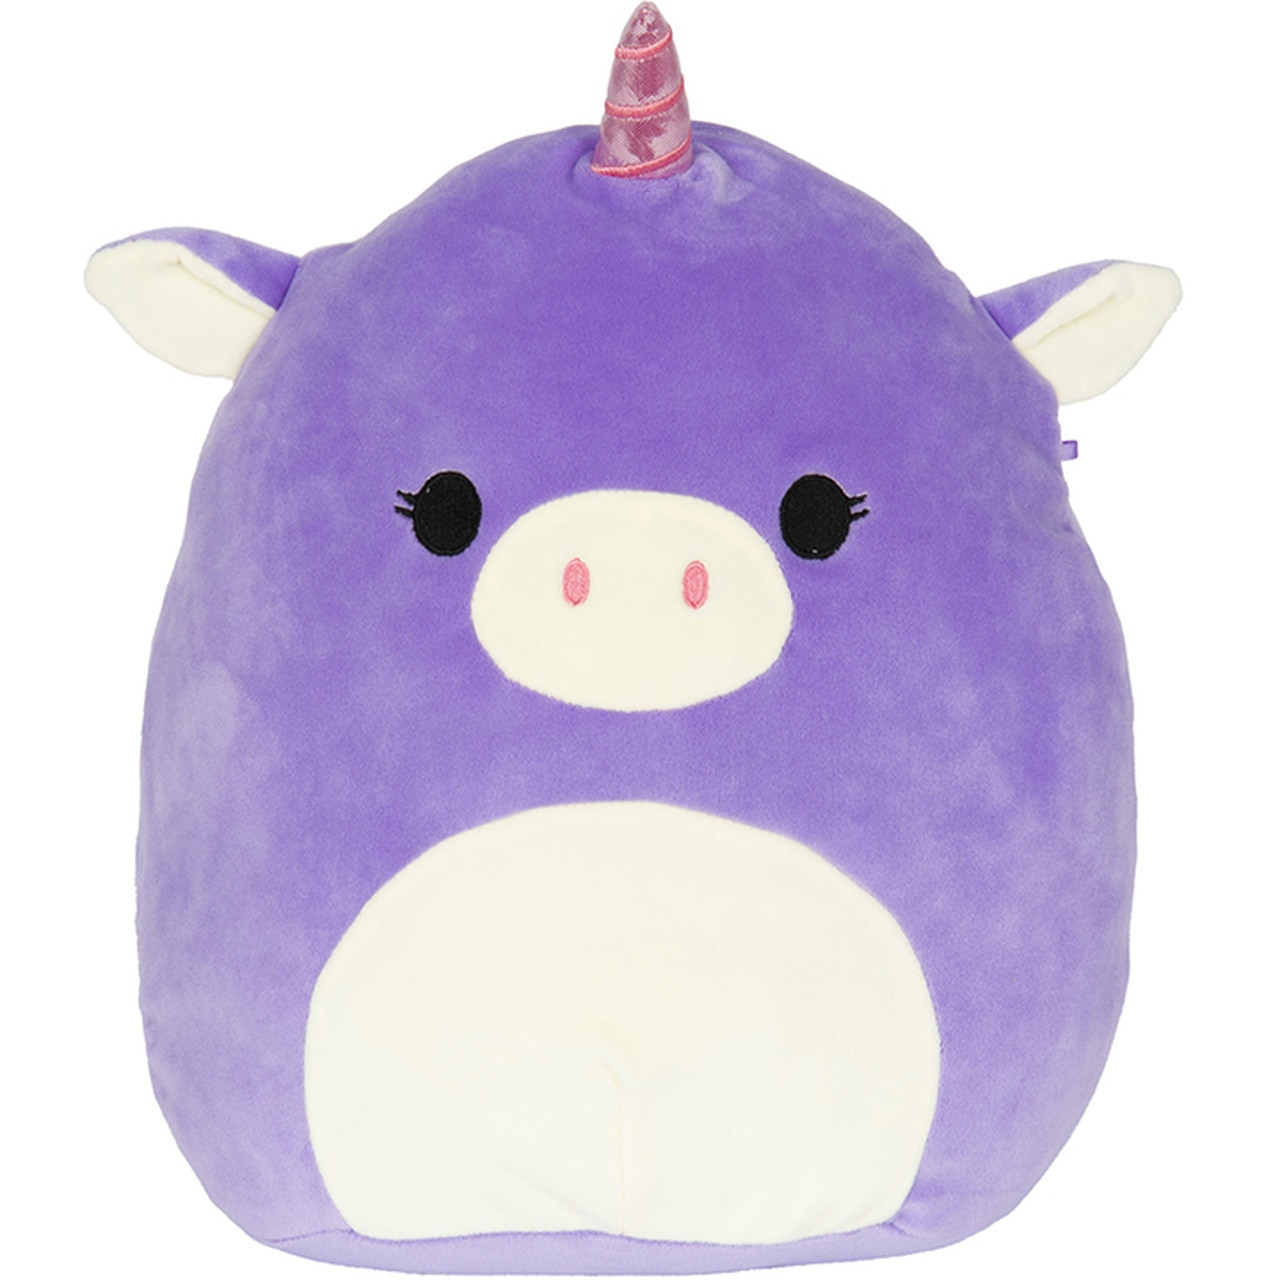 https://cdn11.bigcommerce.com/s-mhr53lwccw/images/stencil/1280x1280/products/112/7572/squishmallows-astrid-purple-unicorn-squishy-soft-plush-toy-5-inch__87524.1663974958.jpg?c=1?imbypass=on